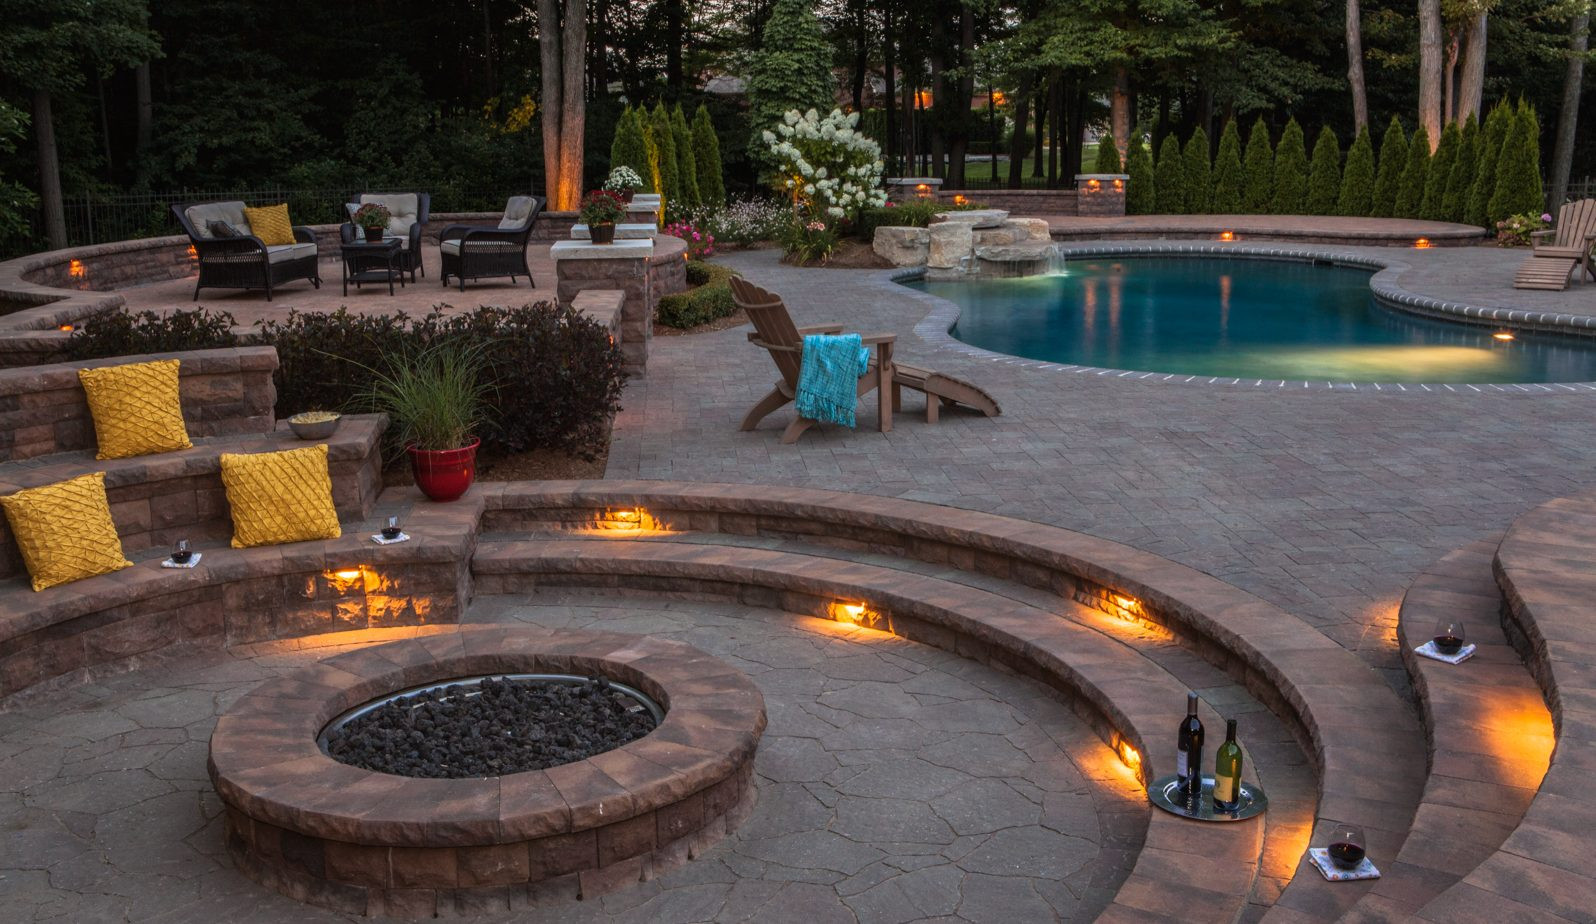 Pool Fire Pit
 Turn Up the Heat with These Cozy Fire Pit Patio Design